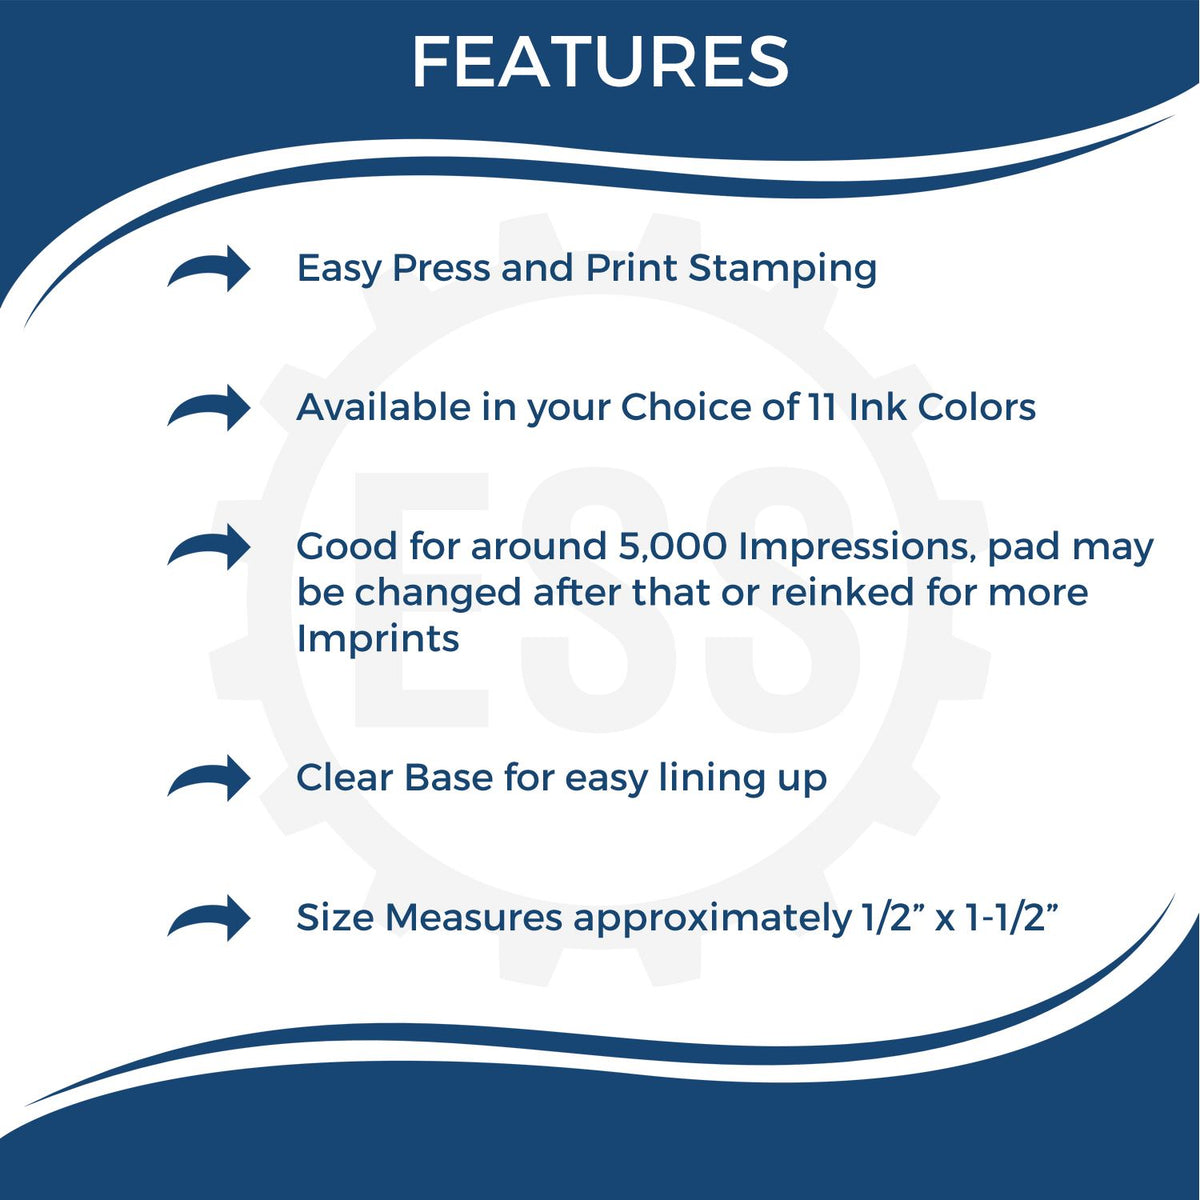 Self Inking Copy For Your Information Stamp